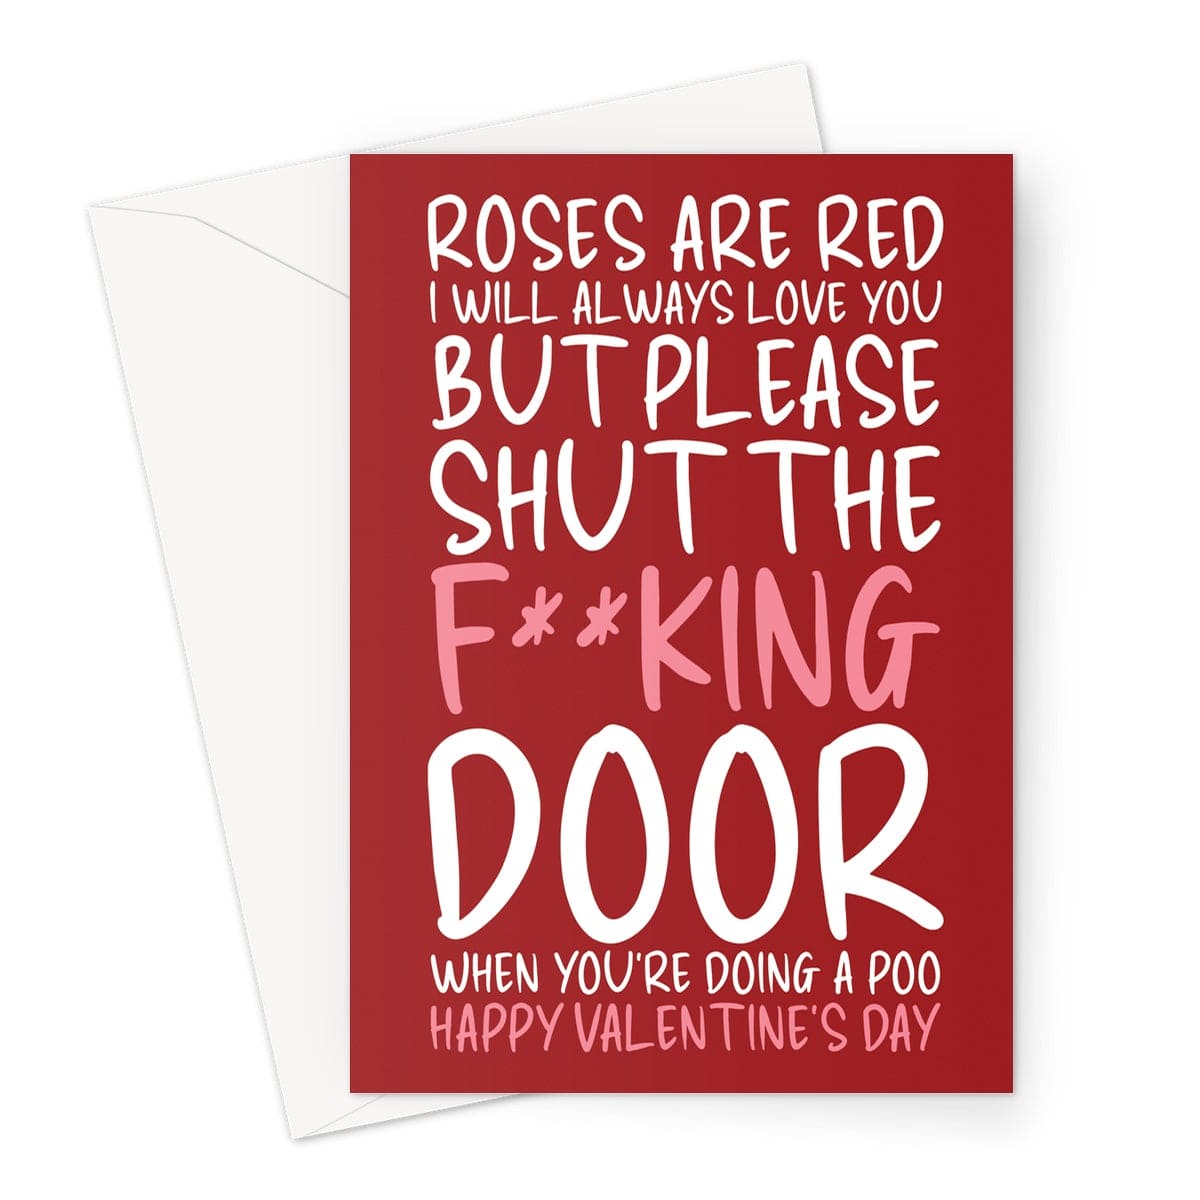 Roses Are Red Poem Valentine S Day Card